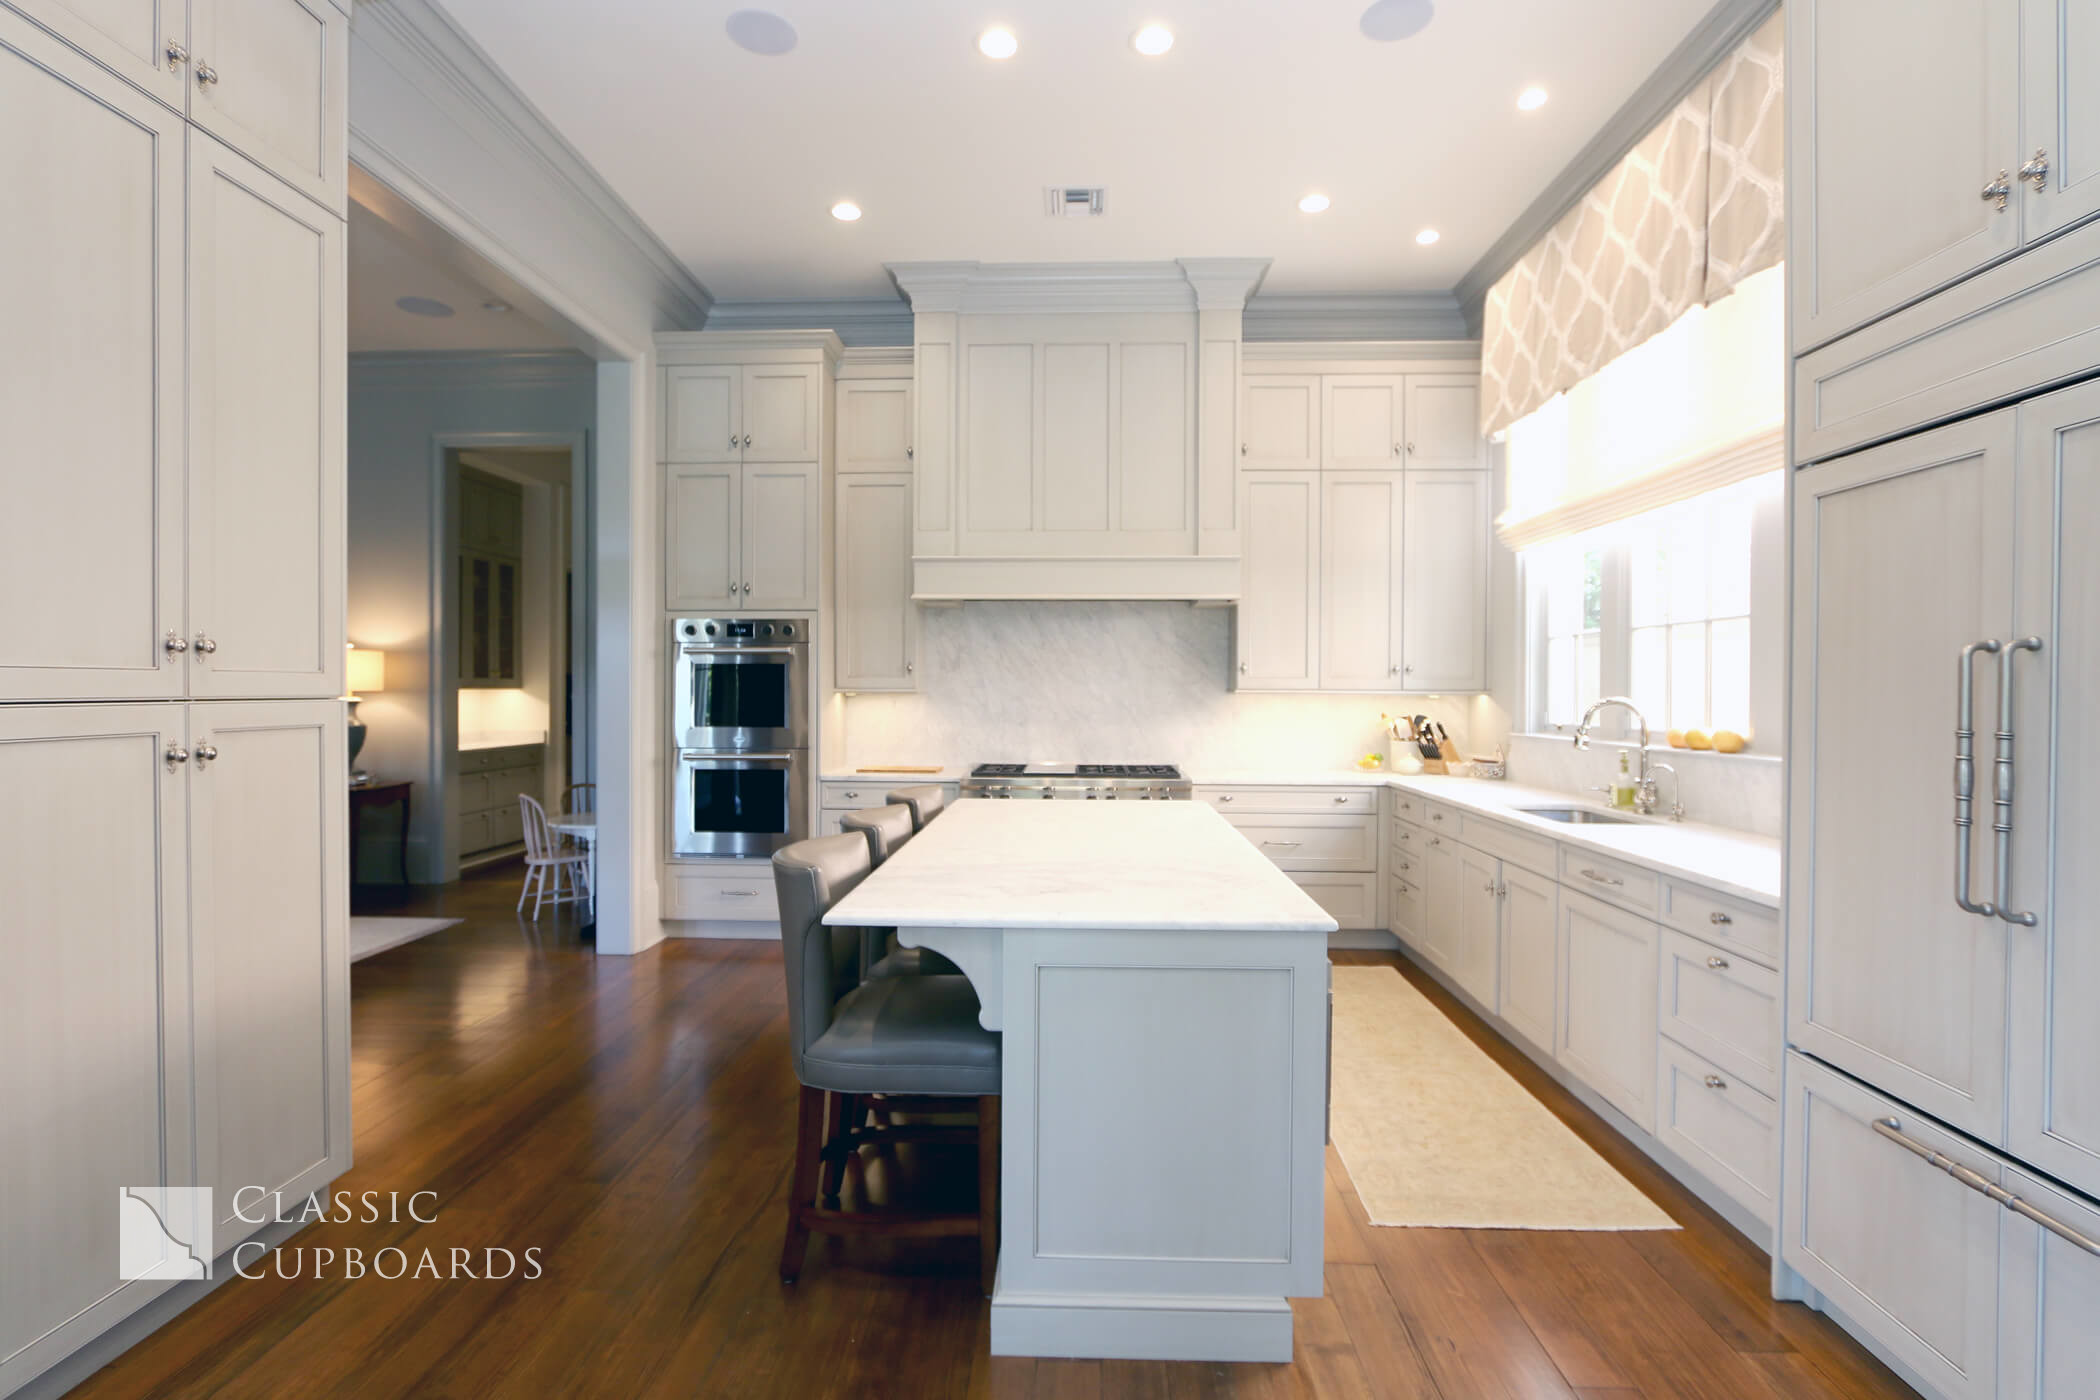 Traditional Kitchens - Old Metairie | Classic Cupboards